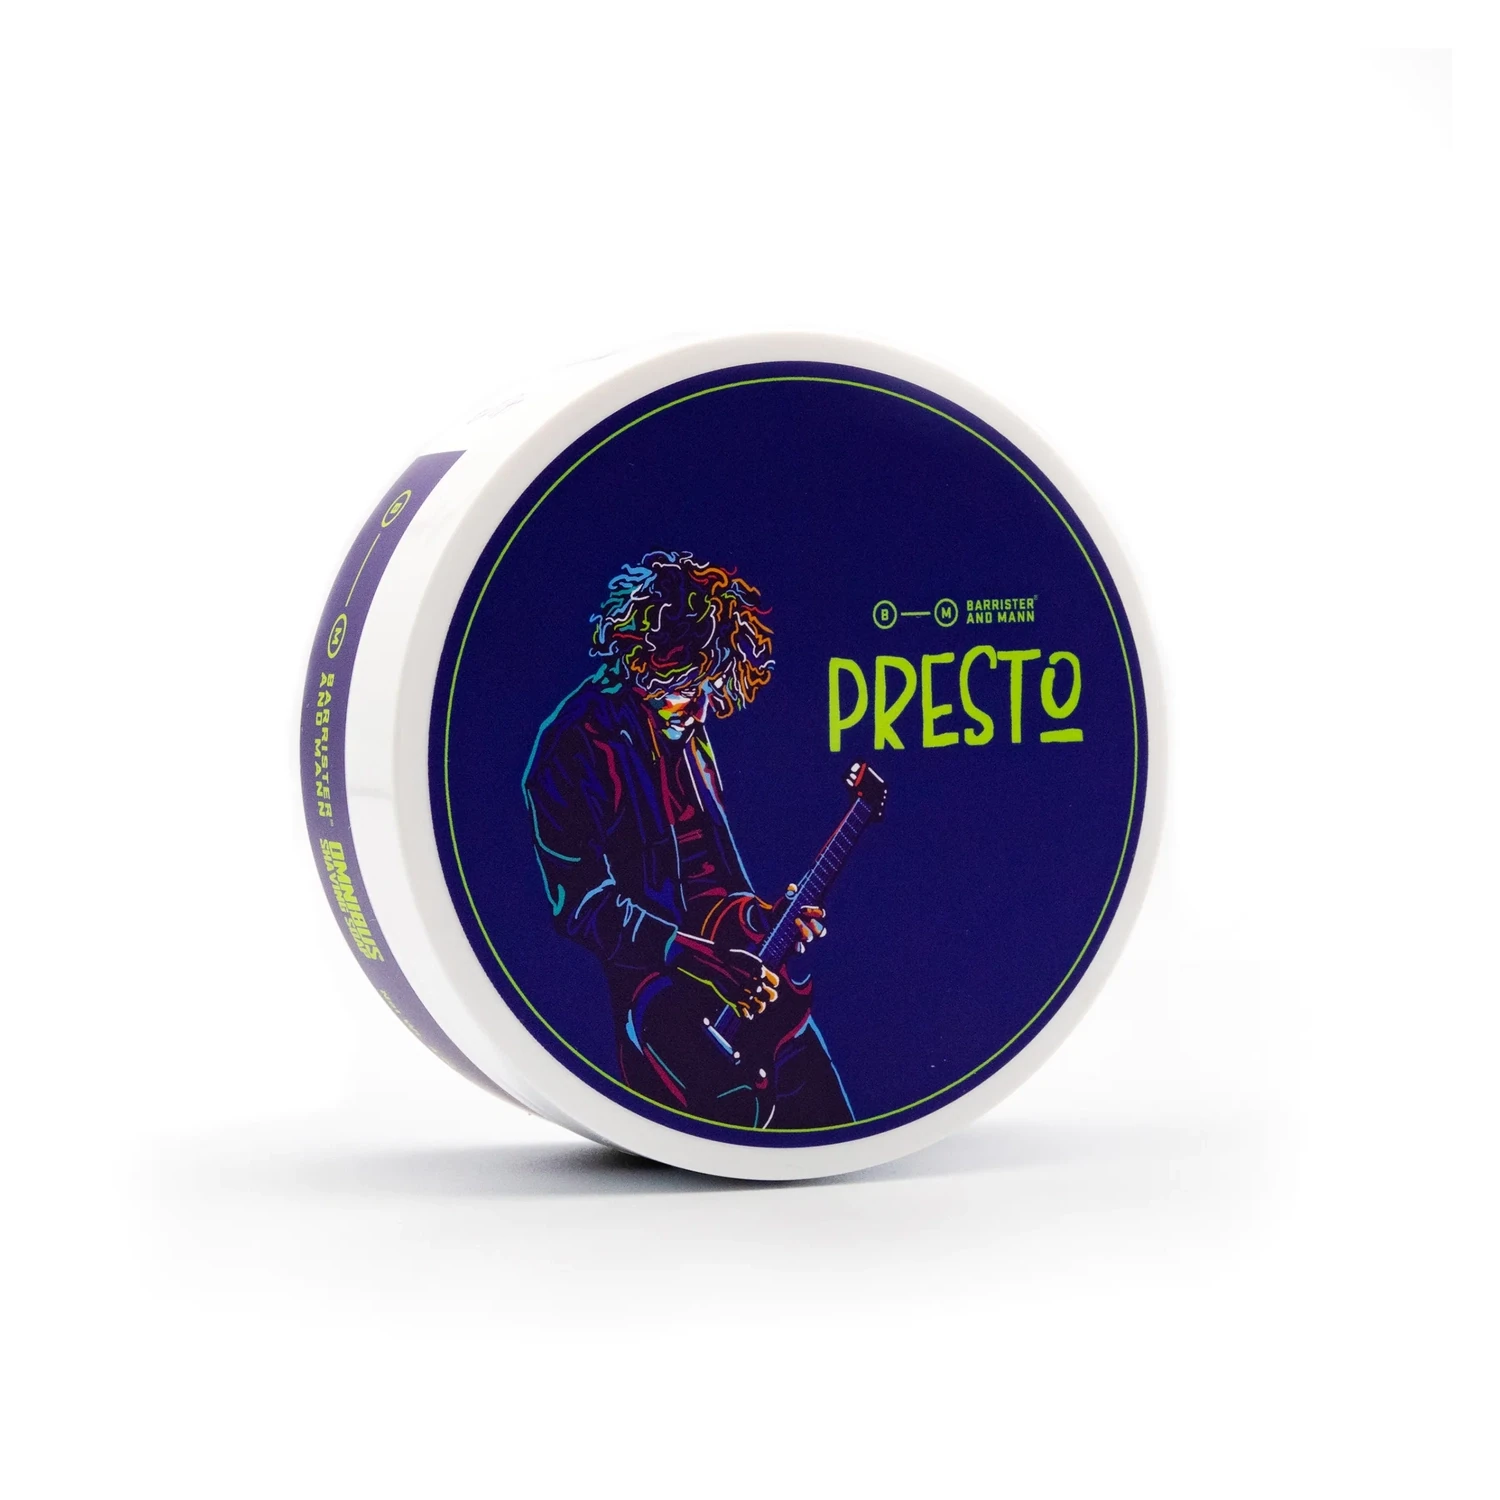 Barrister and Mann Presto Artisan Shave Soap